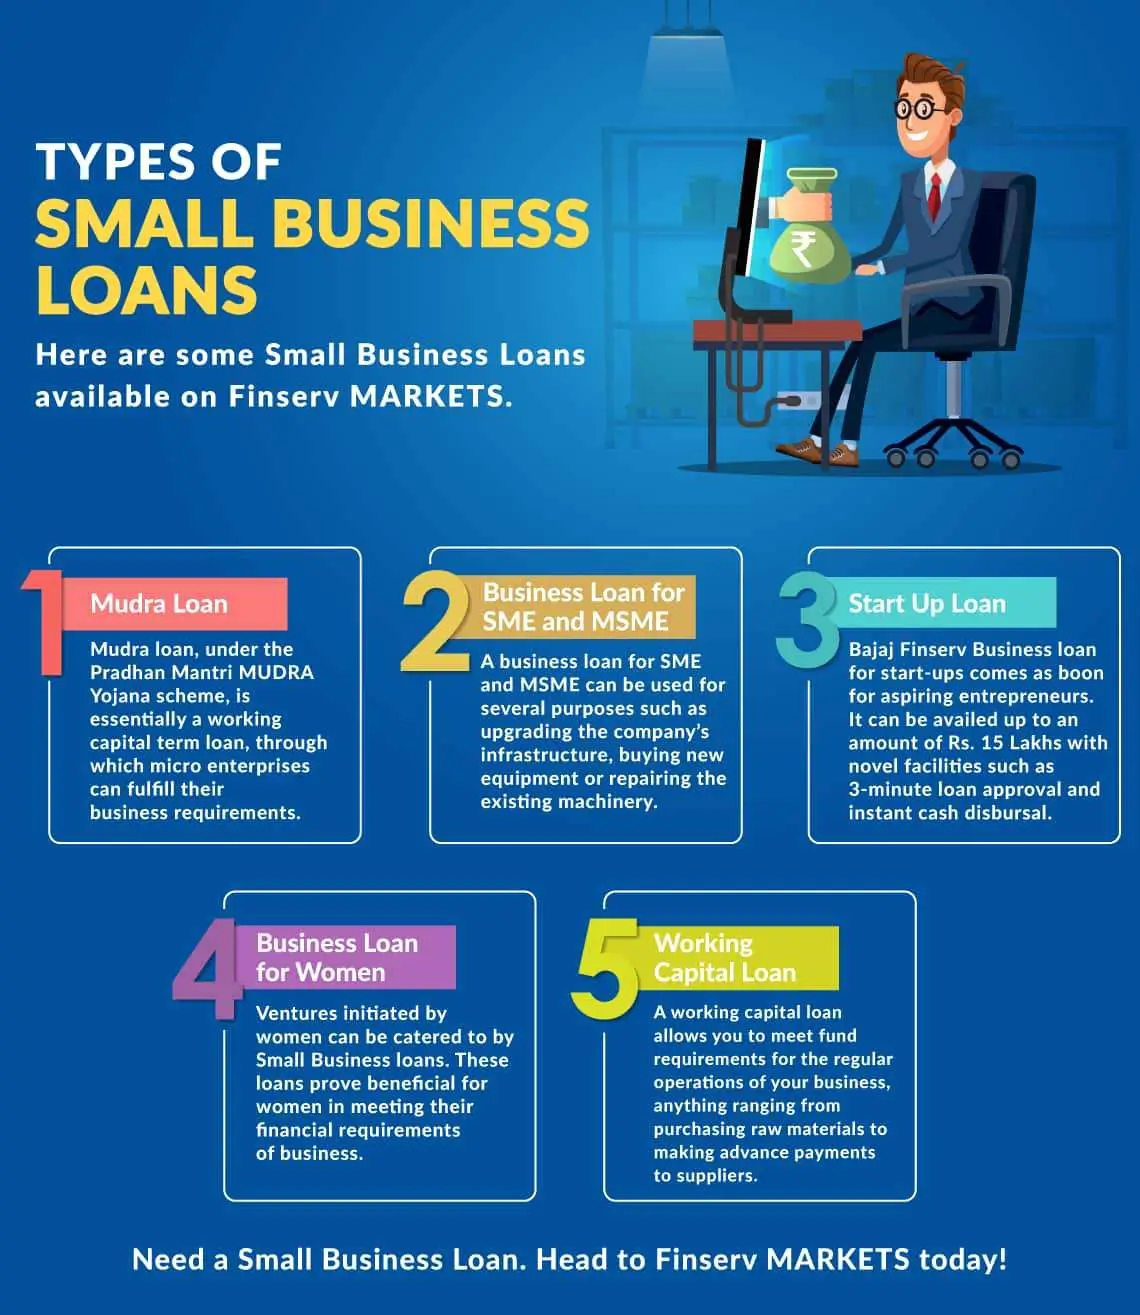 Types of Small Business Loans